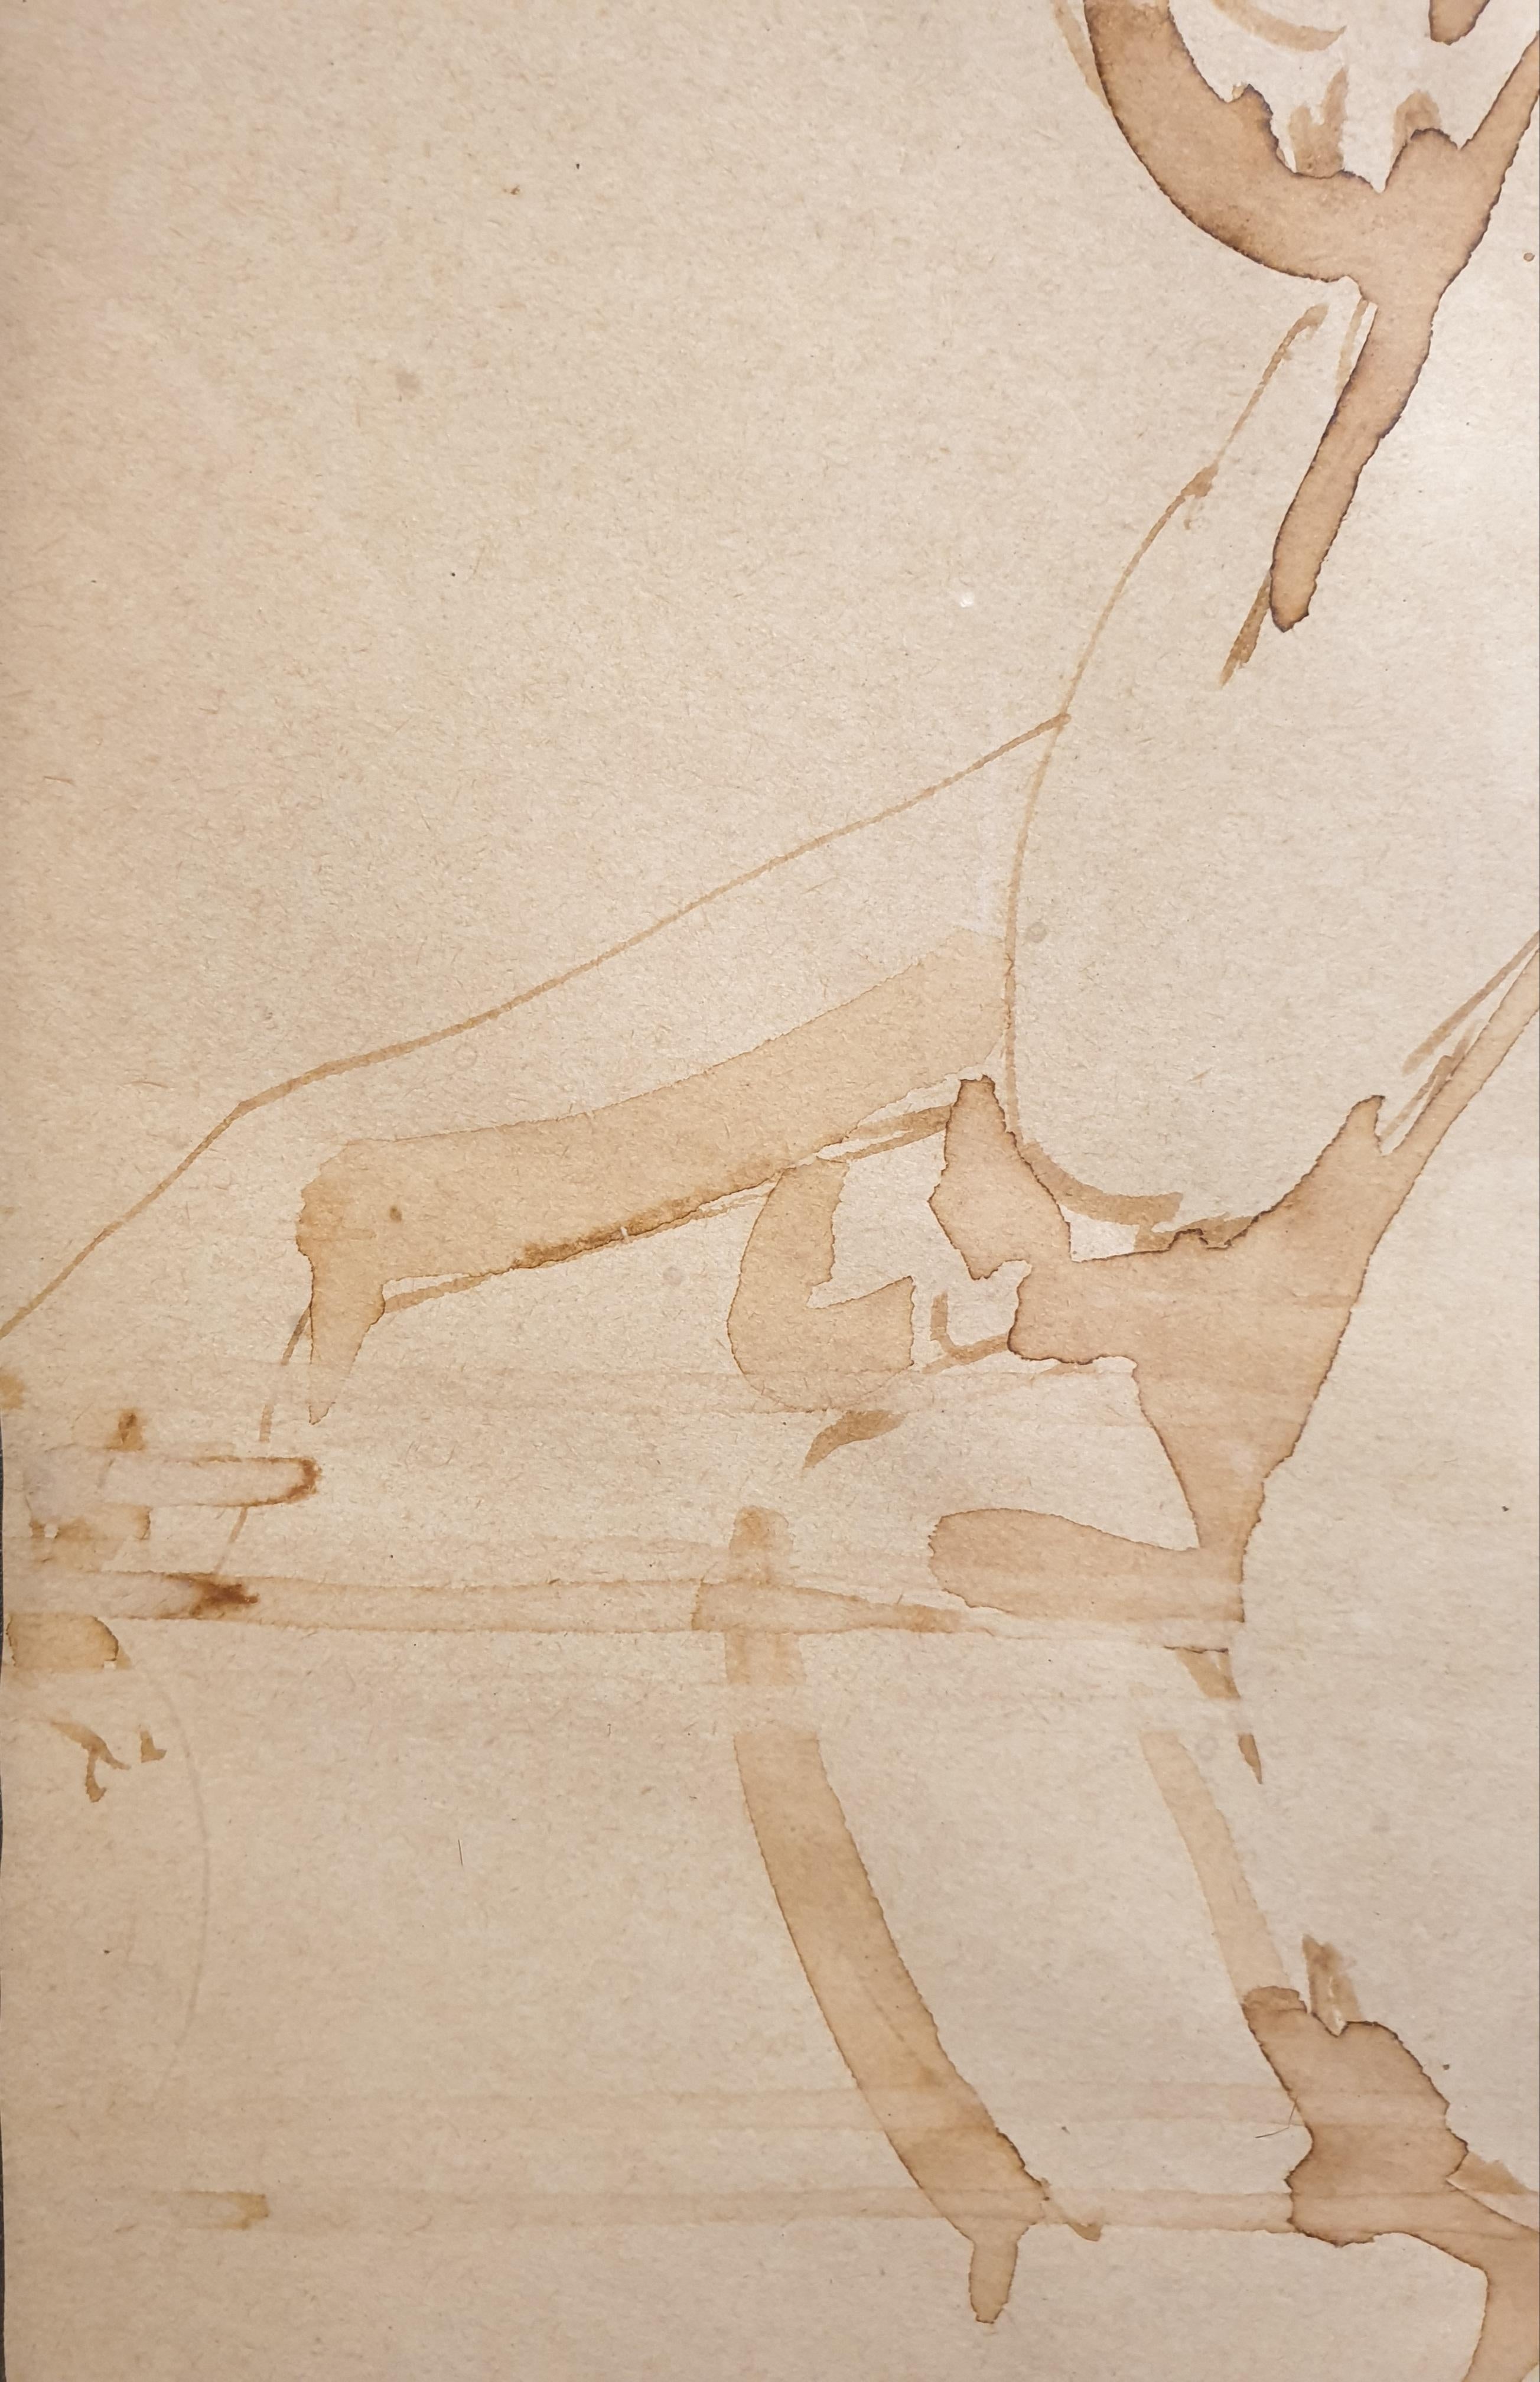 Mid-century ink drawing on paper of a female nude, signed Devine bottom right, in plain wood frame under glass.

A beautiful light touch and economy of line are what makes this drawing so alluring. It follows a long tradition of 'encre de chine' and